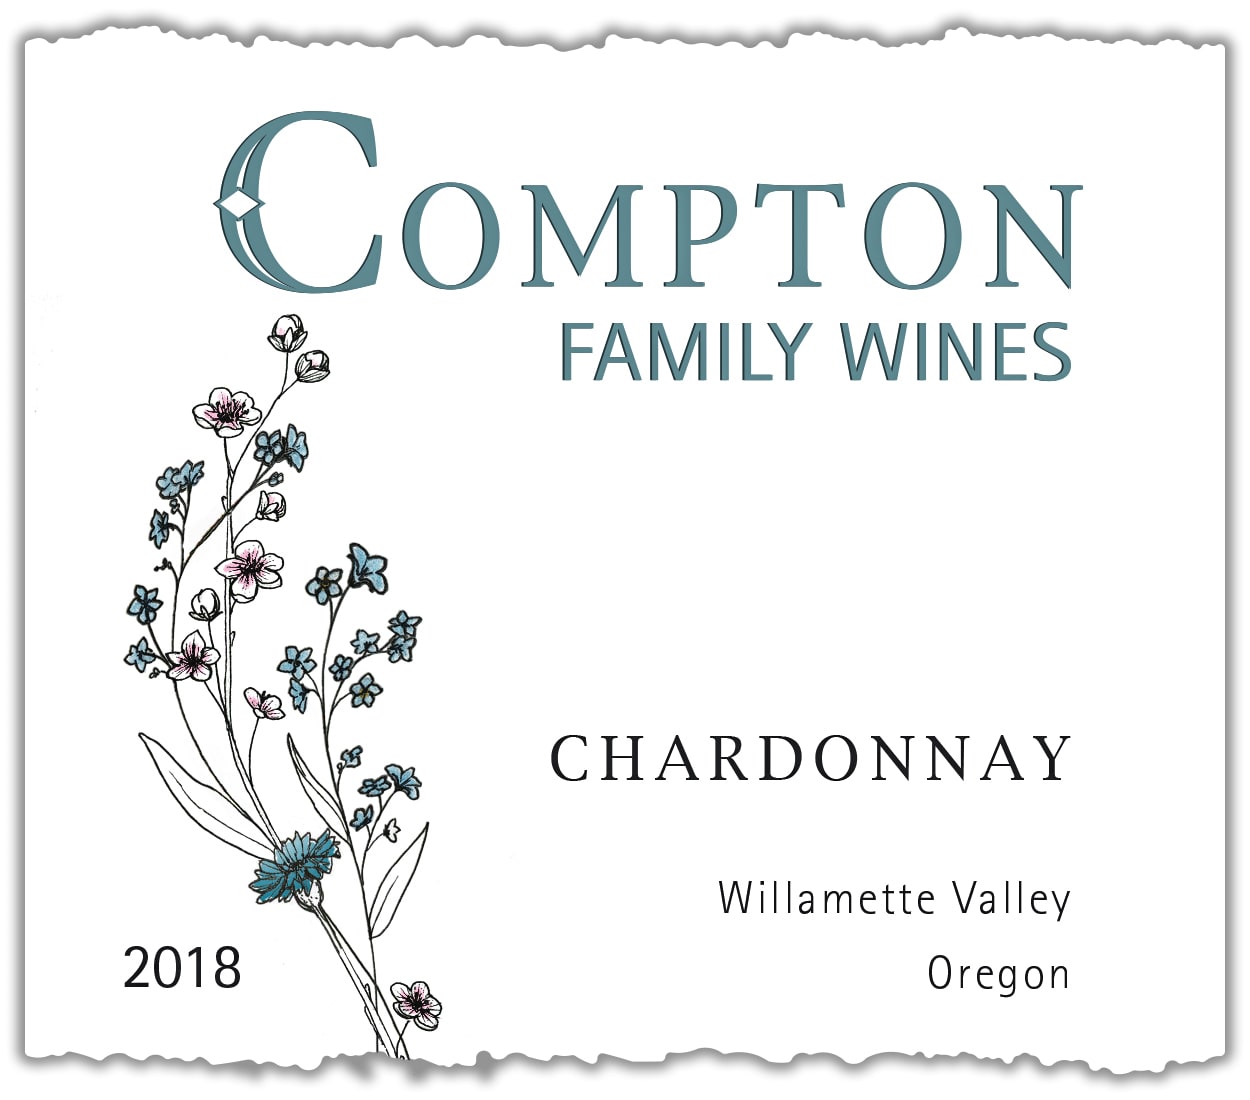 Compton Garden Series from Compton Family Wines